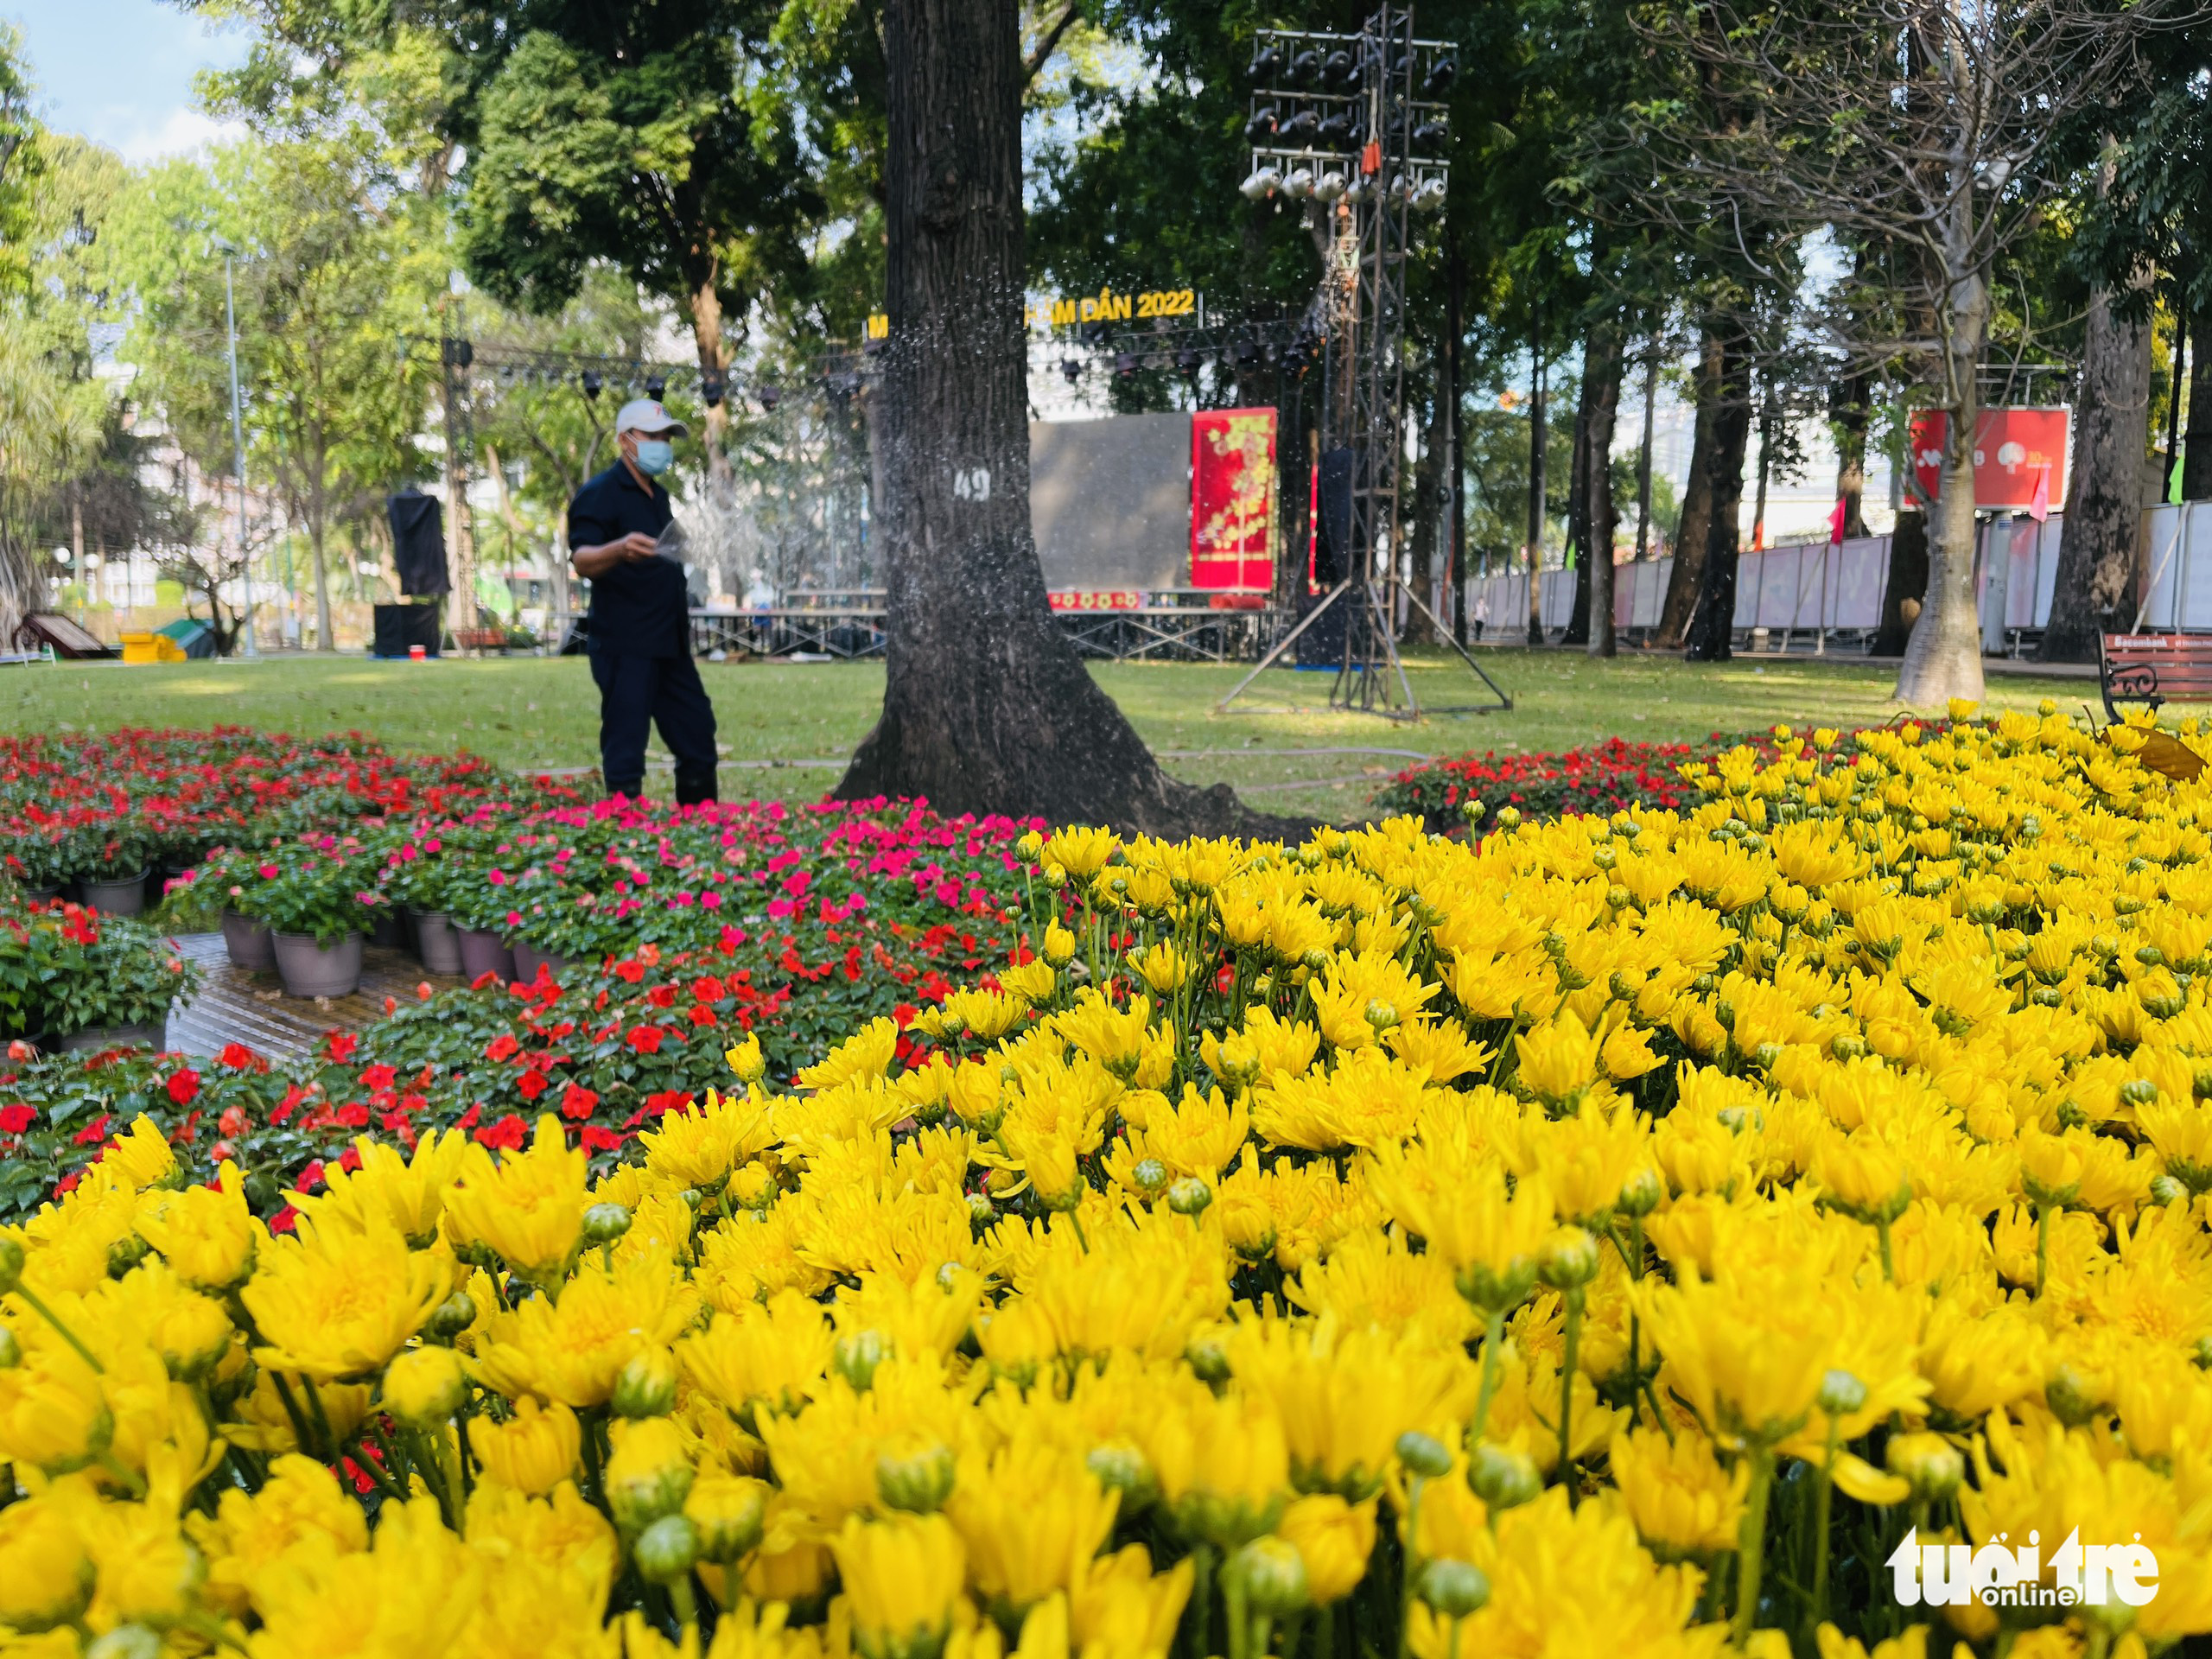 Potted flowers are brought to Tao Dan Park in Ho Chi Minh City, January 23, 2022. Photo: Le Phan / Tuoi Tre